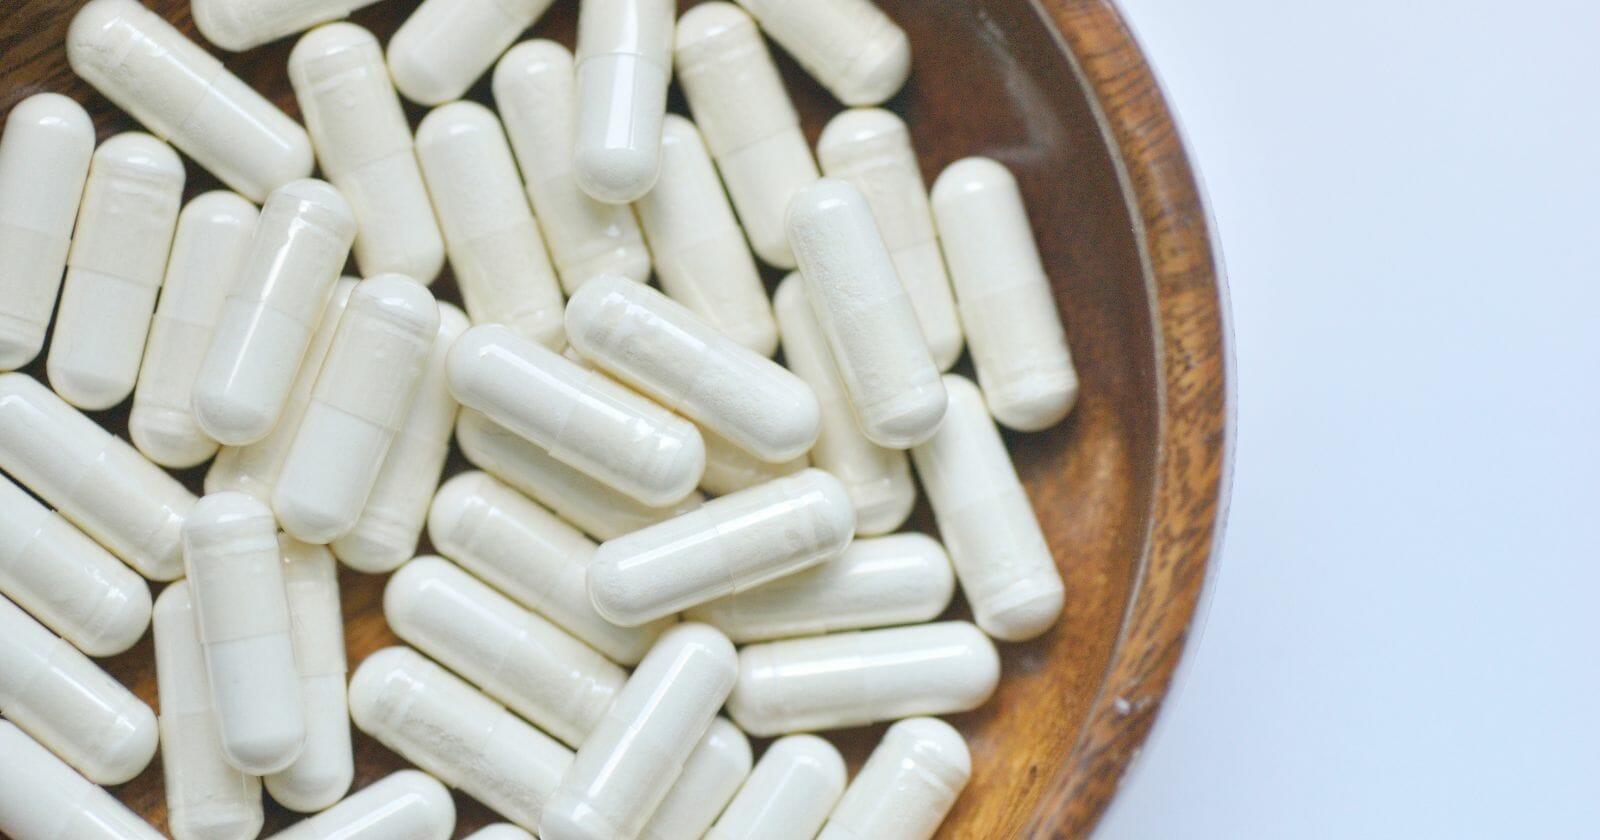 Bowl of white capsule supplements